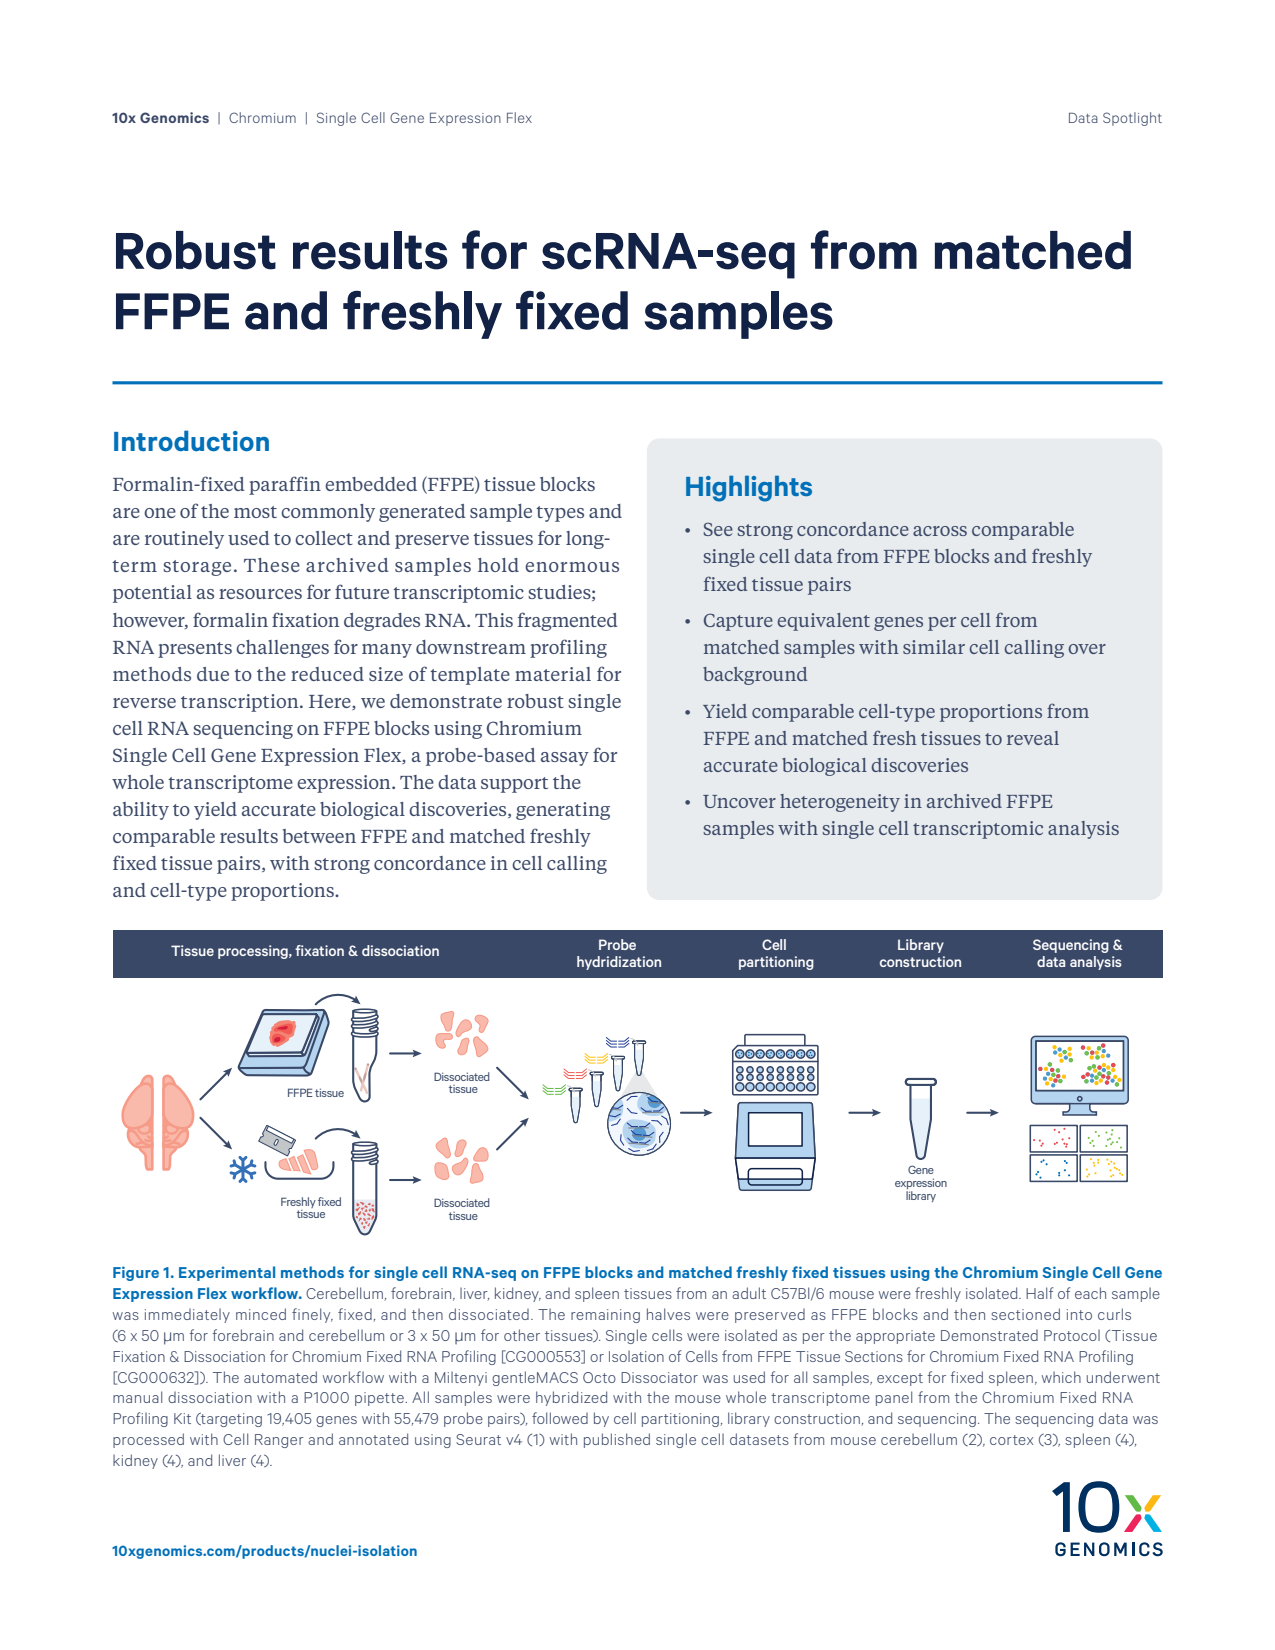 Data Spotlight: Robust results for scRNA-seq from matched FFPE and freshly fixed samples